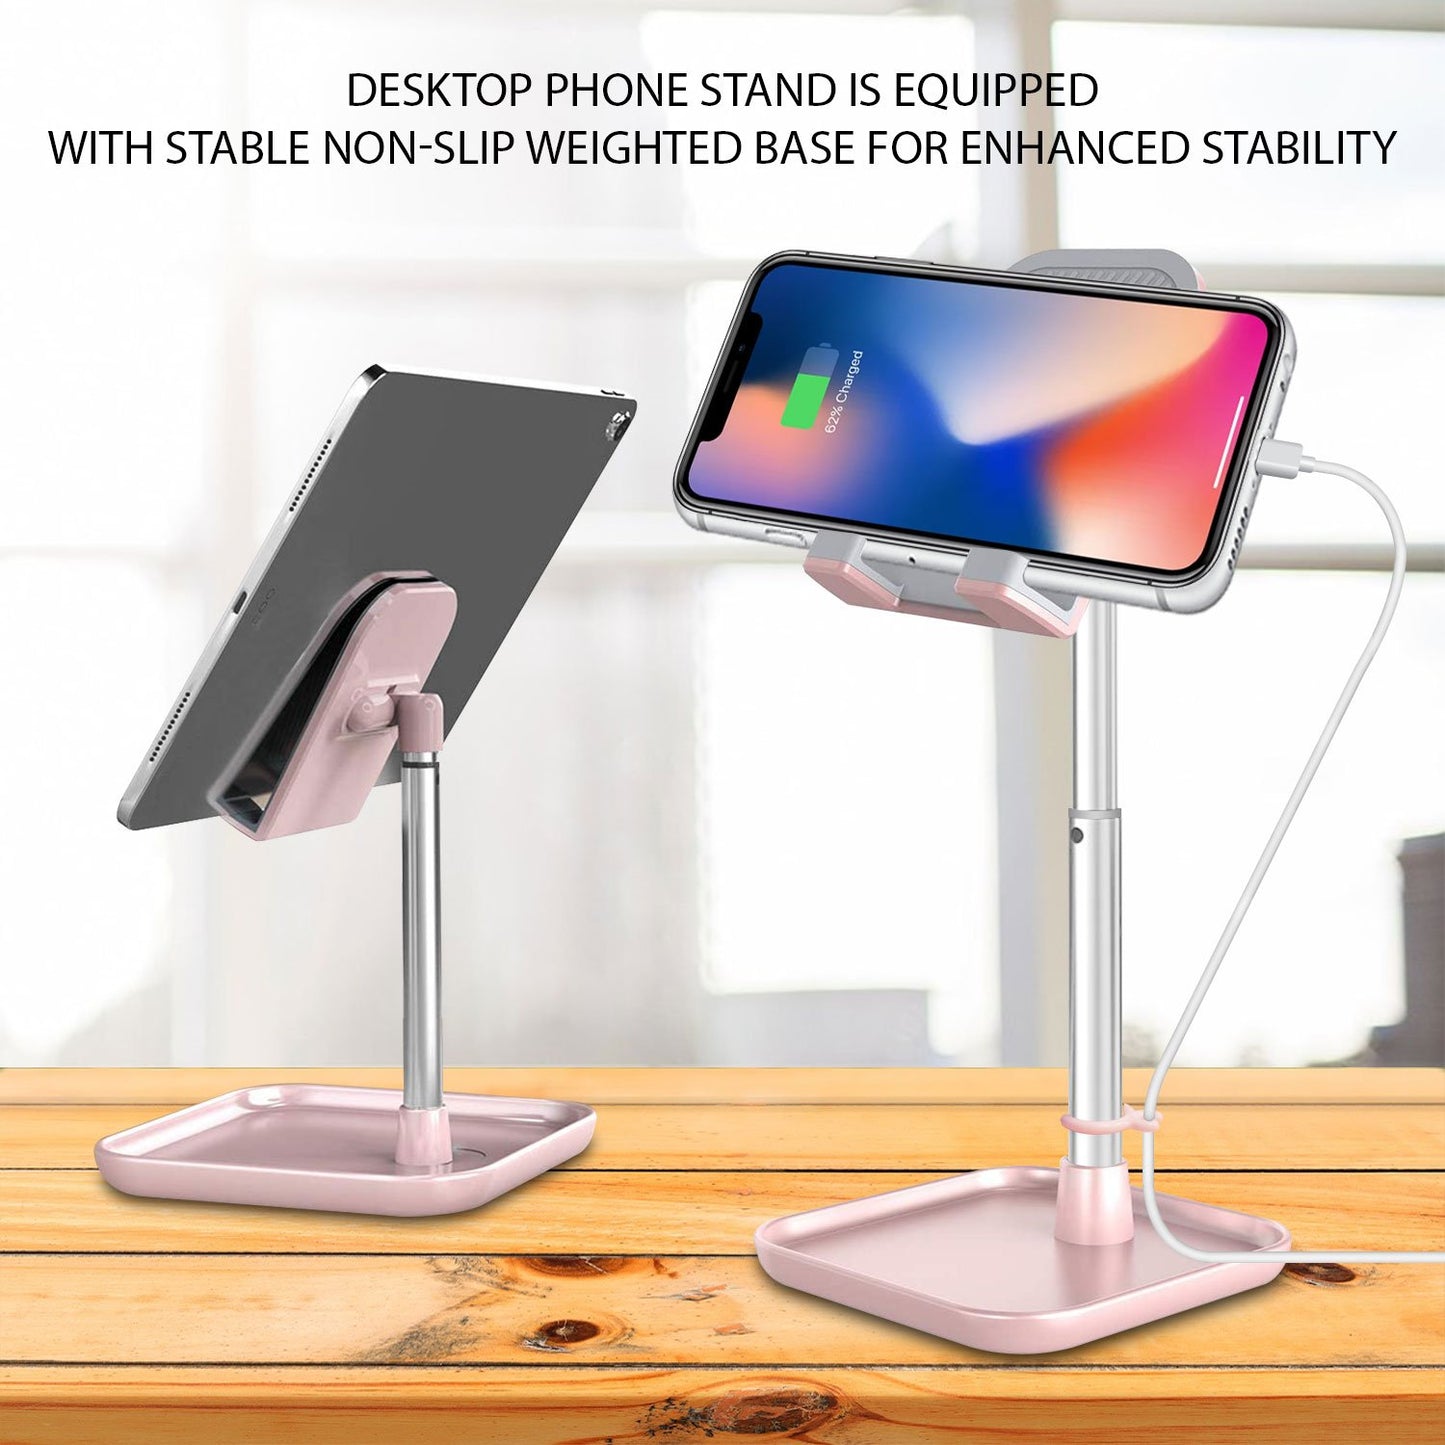 PH150PK - Adjustable Desktop Smartphone and Tablet Stand with Mini Shelf, Non-Slip Rubberized Grips and Base Compatible to Smartphones, Tablets, iPads